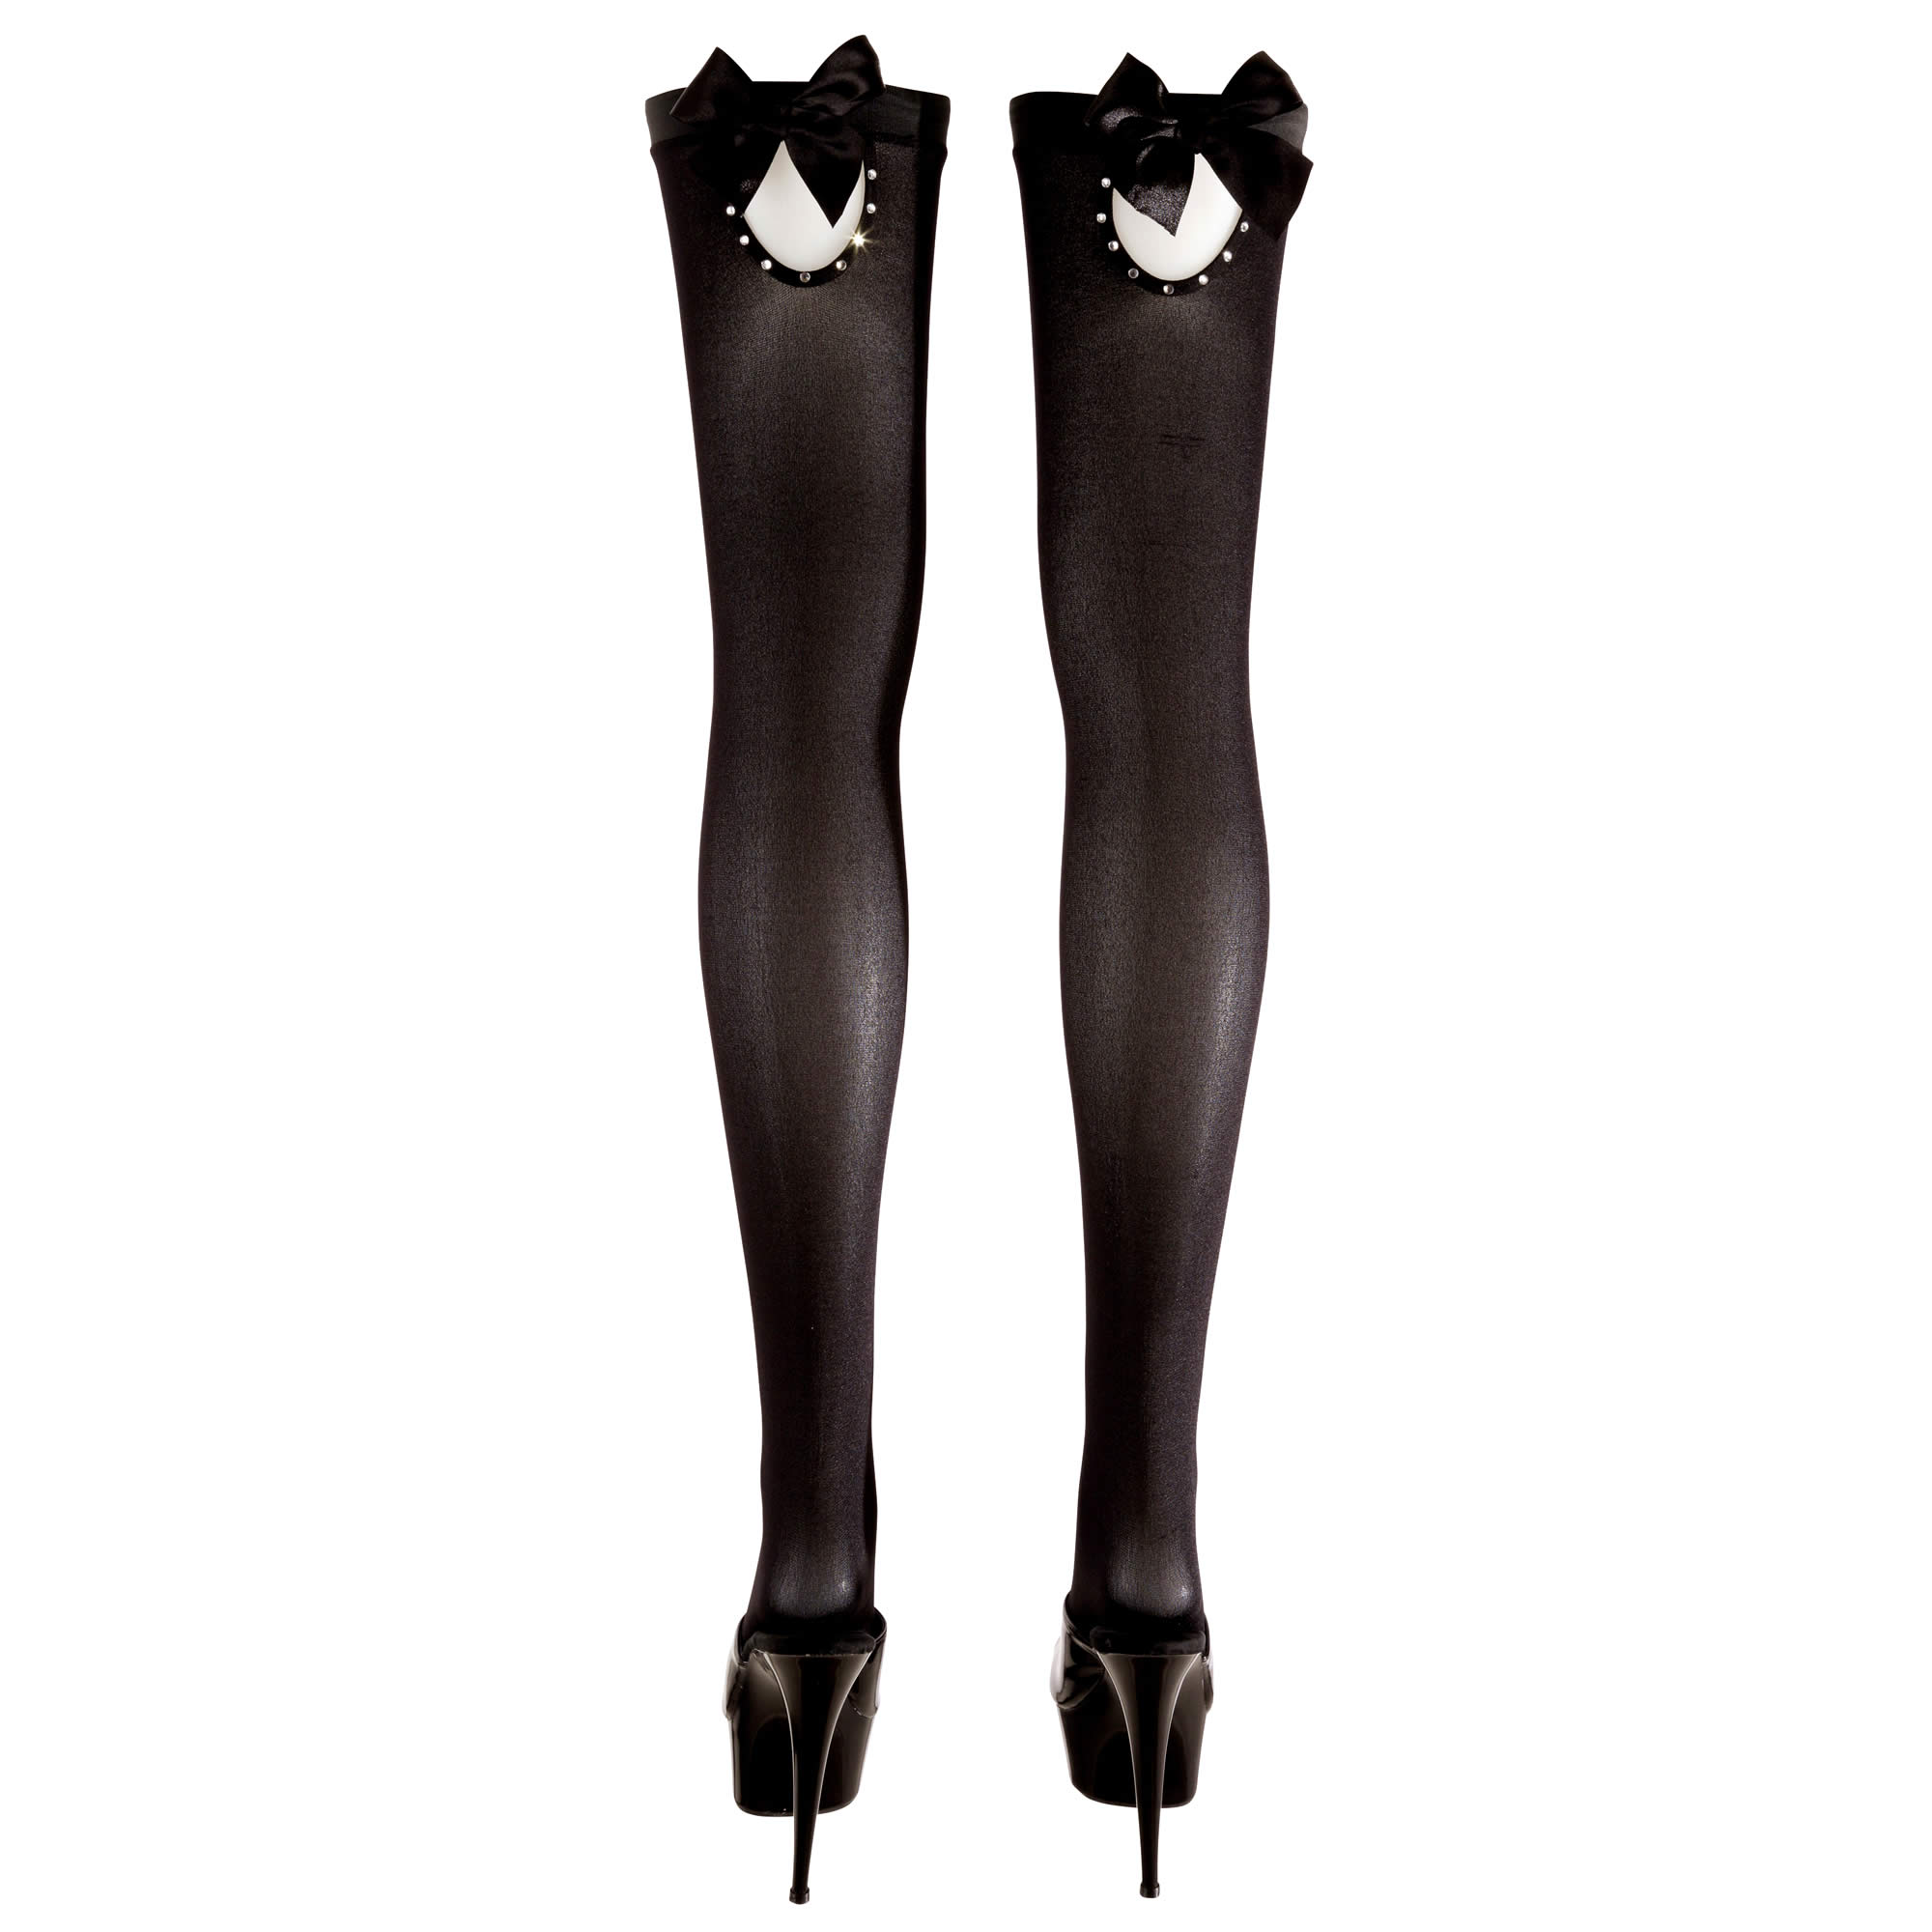 Stay-Up Stockings in Black with Bow